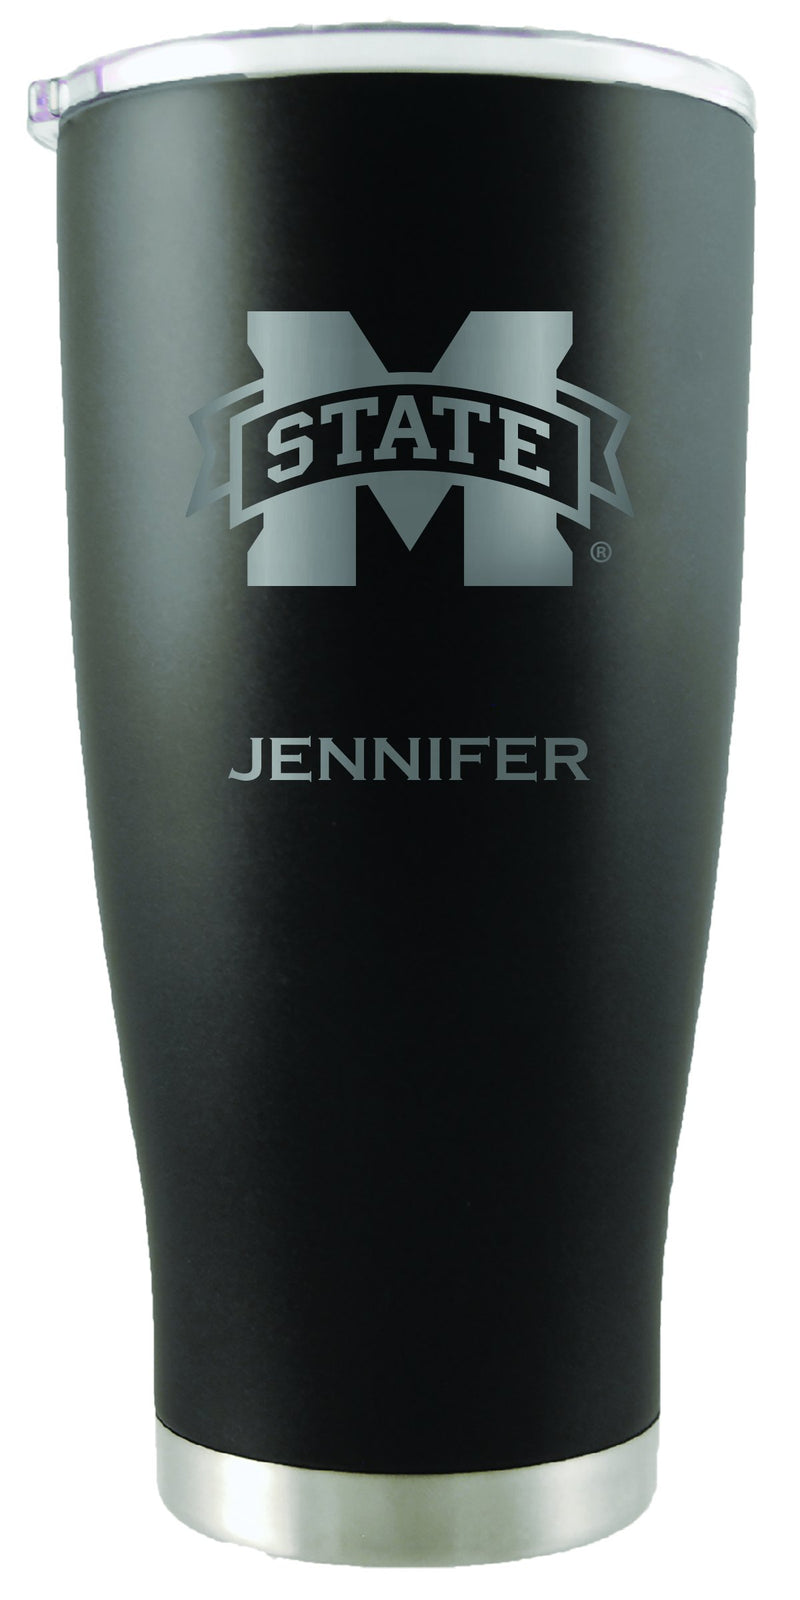 20oz Black Personalized Stainless Steel Tumbler | Mississippi State
COL, CurrentProduct, Drinkware_category_All, Mississippi State Bulldogs, MSS, Personalized_Personalized
The Memory Company